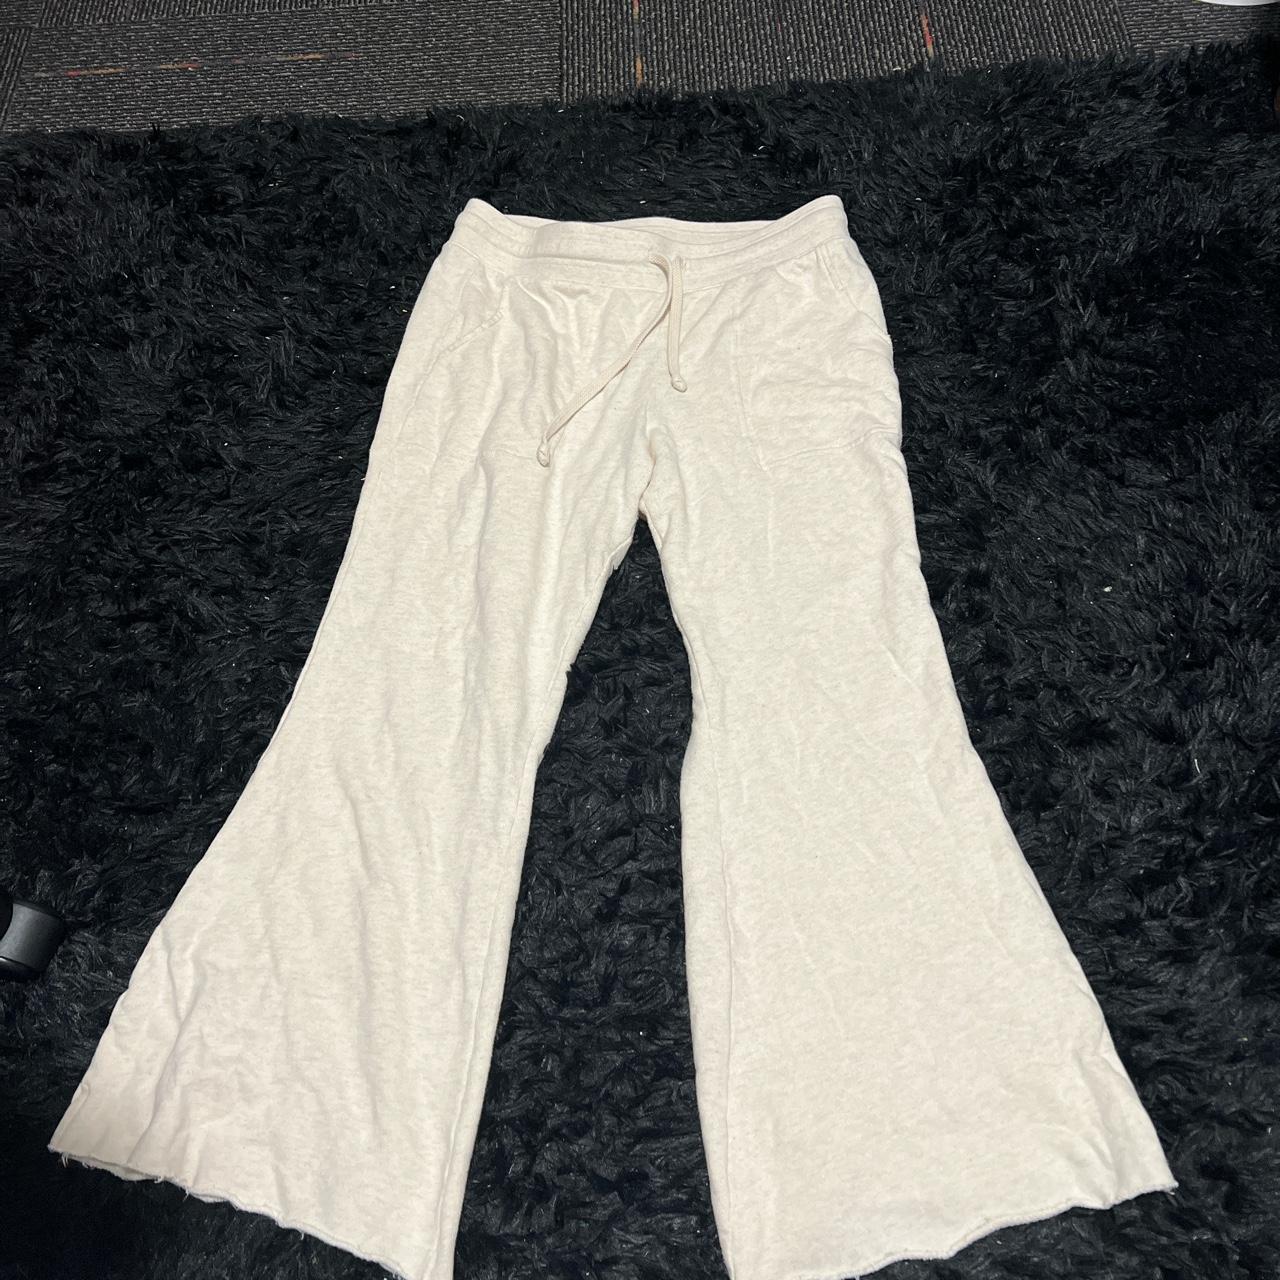 Aerie flare beige sweatpants! perfect for lounge or - Depop